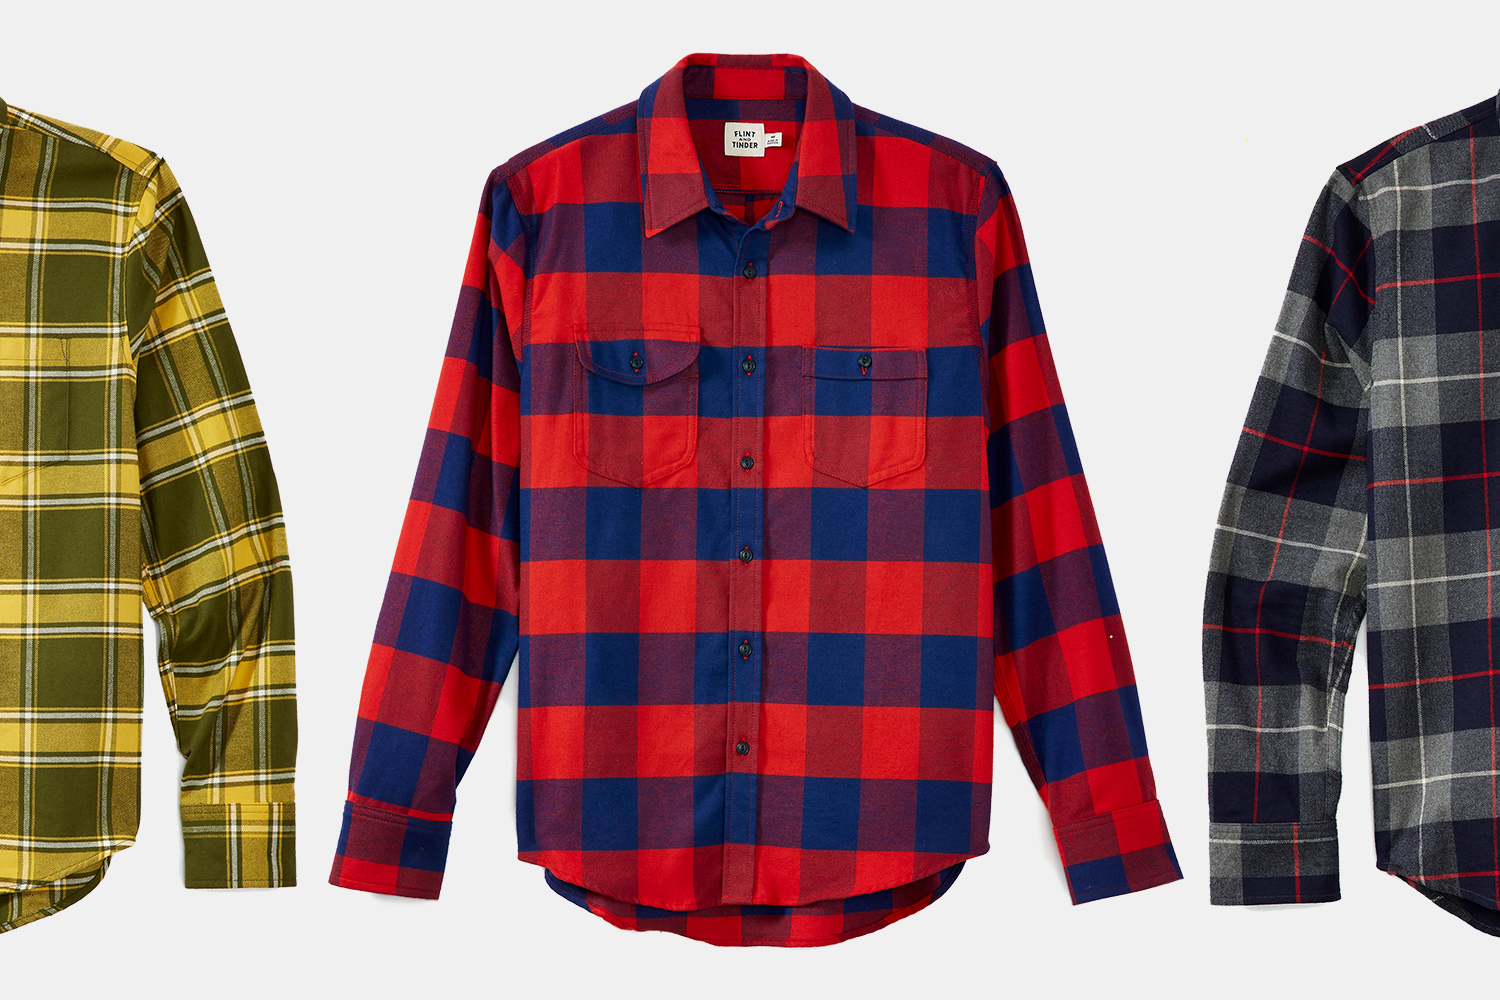 Flint and Tinder flannel shirts